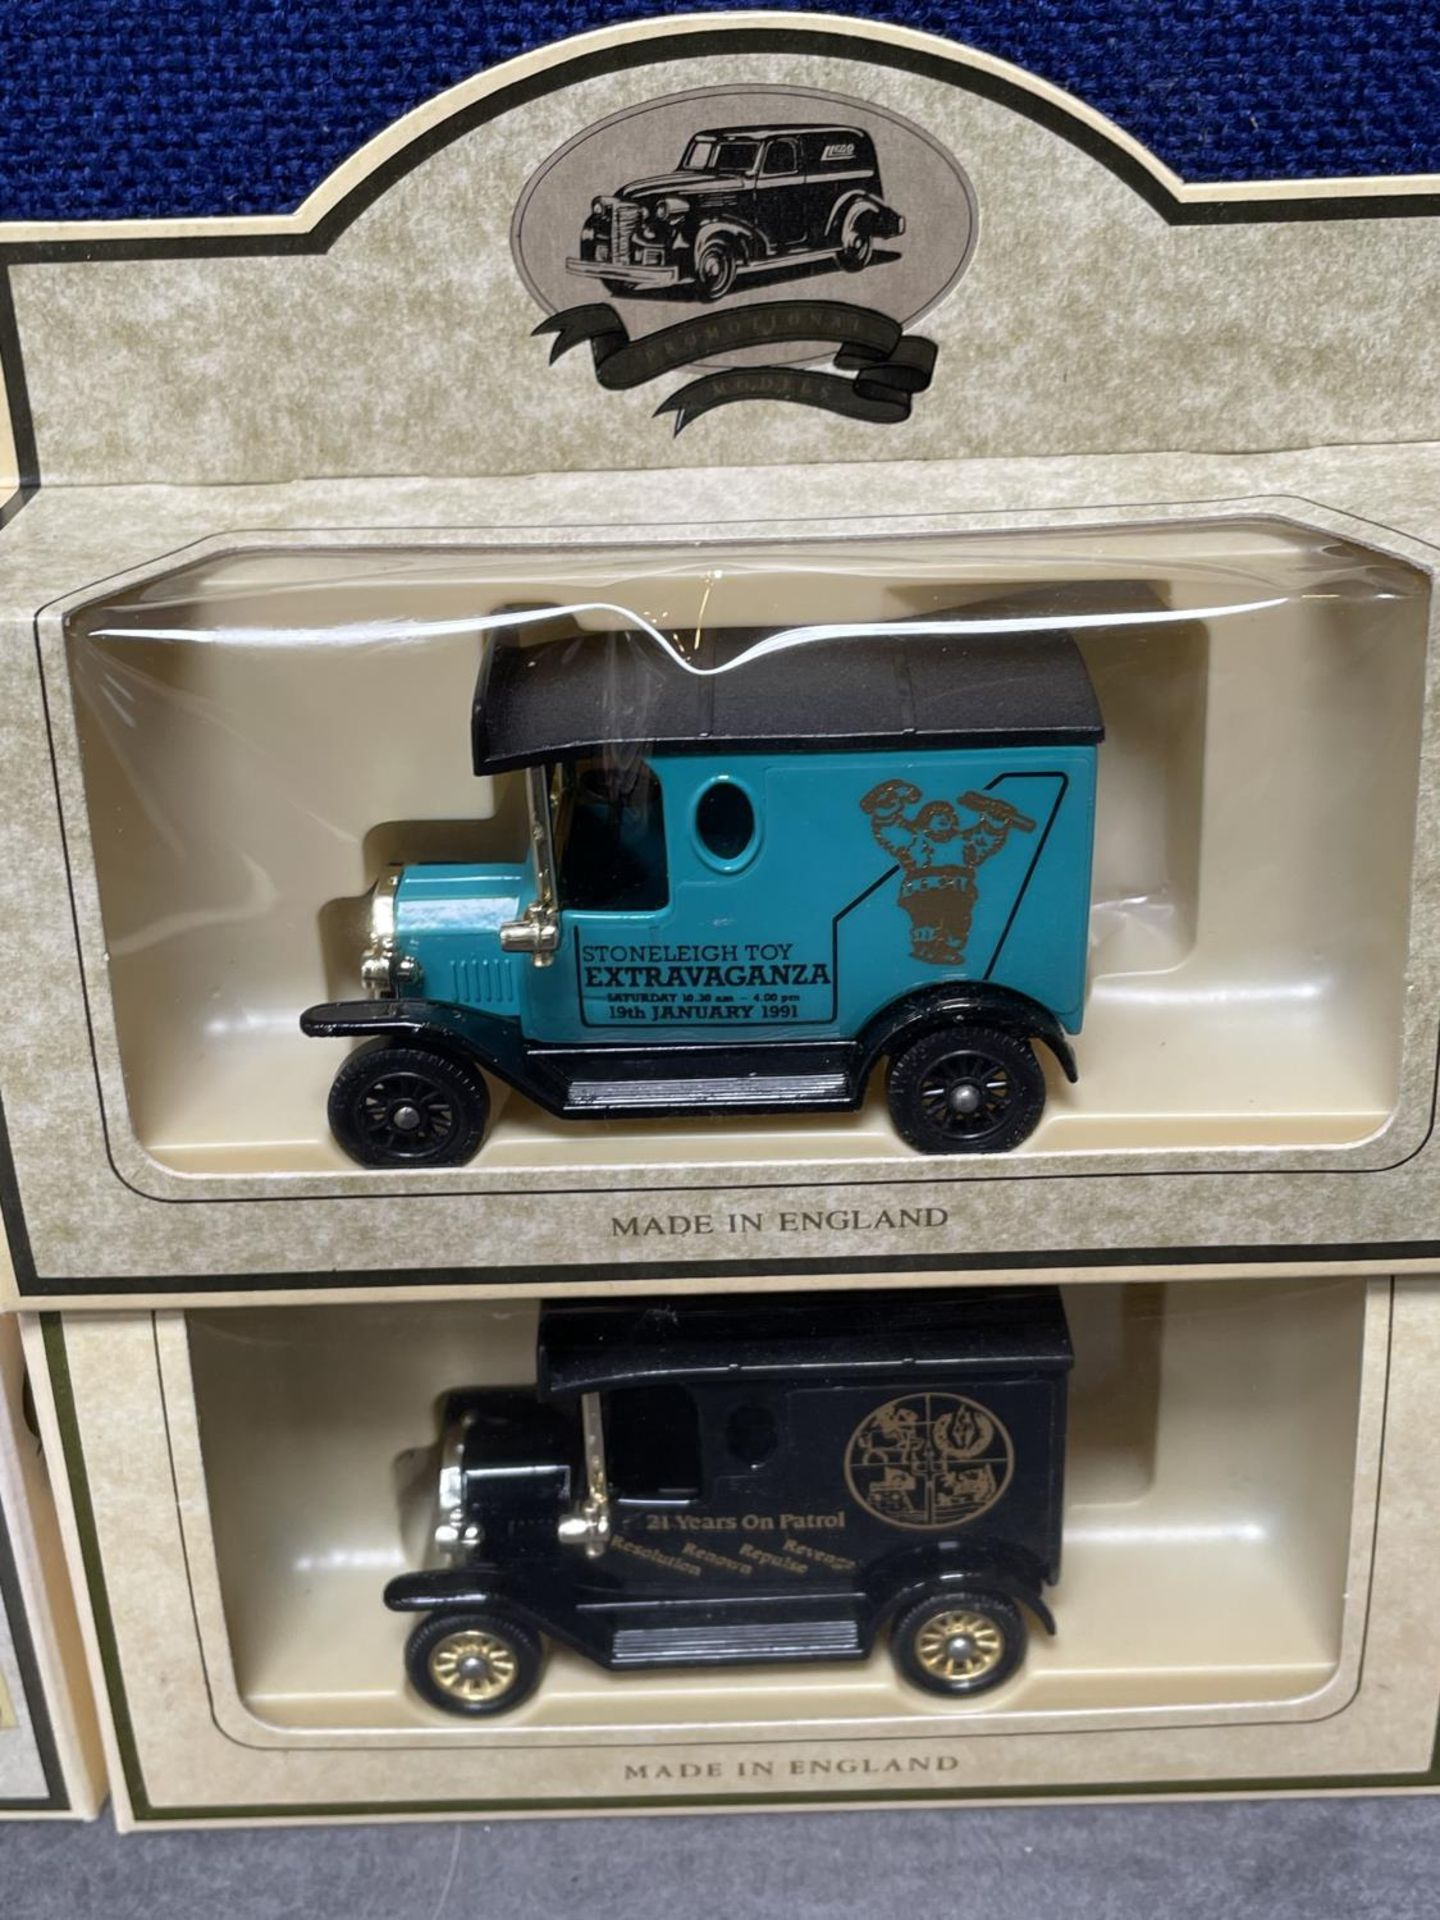 5 x Lledo Diecast Vehicles Individually Boxed Advertising Stoneleigh Toy Extravaganza / Walsall - Image 3 of 4